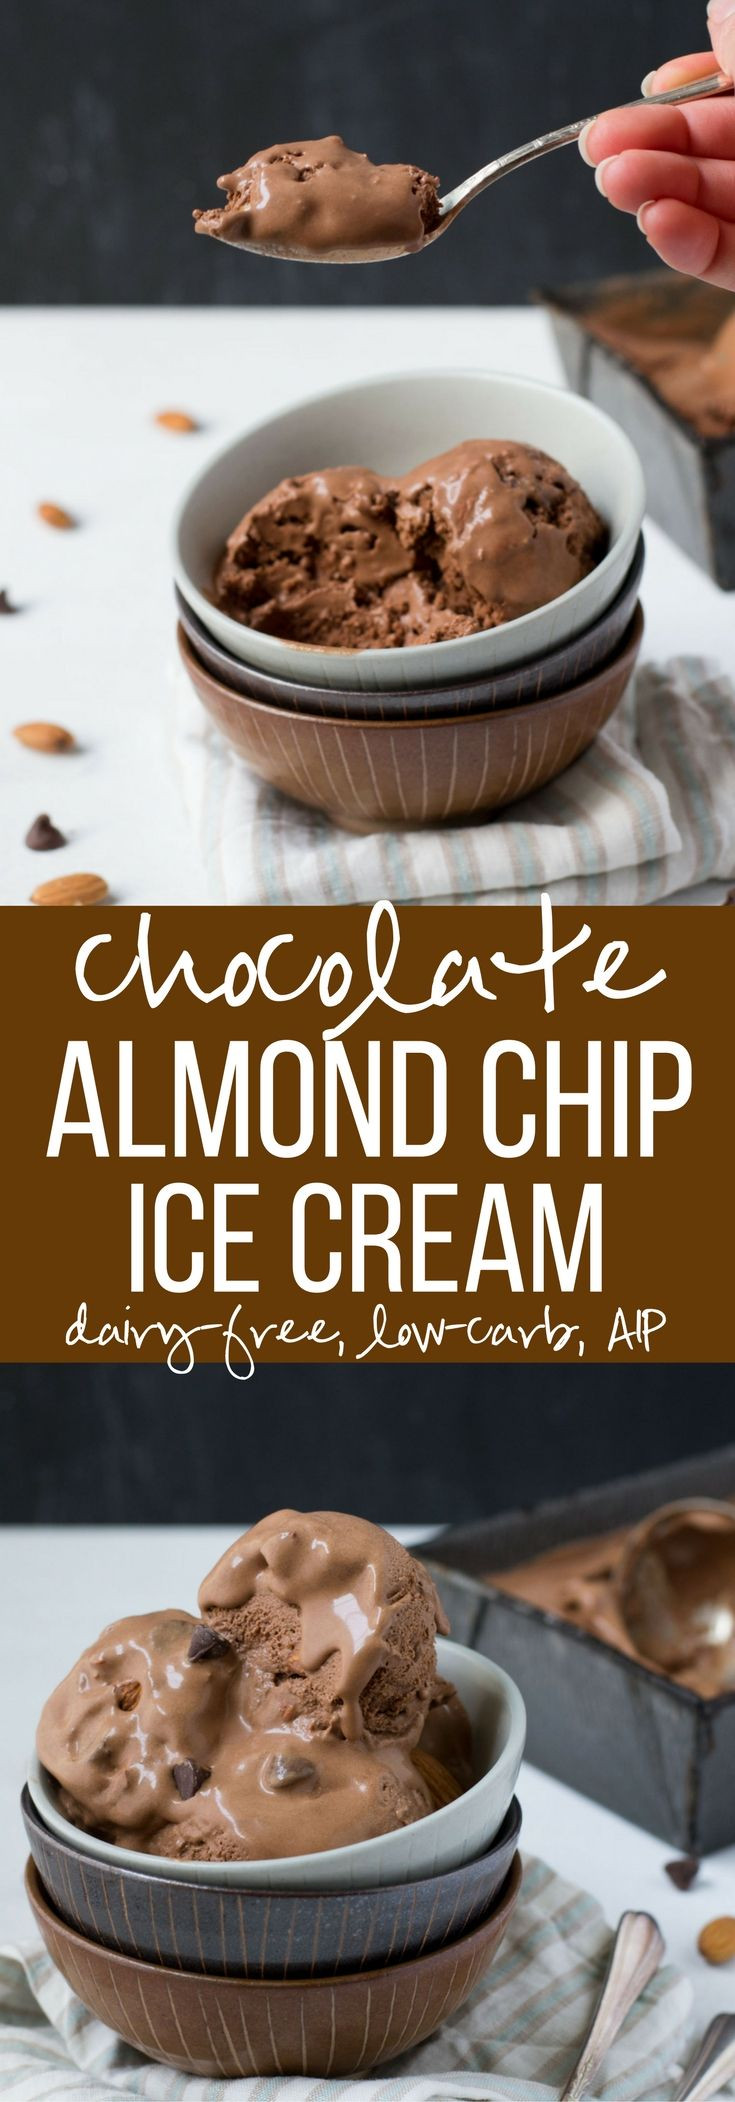 Low Carb Store Bought Desserts
 Chocolate Almond Chip Ice Cream made with Coconut Milk